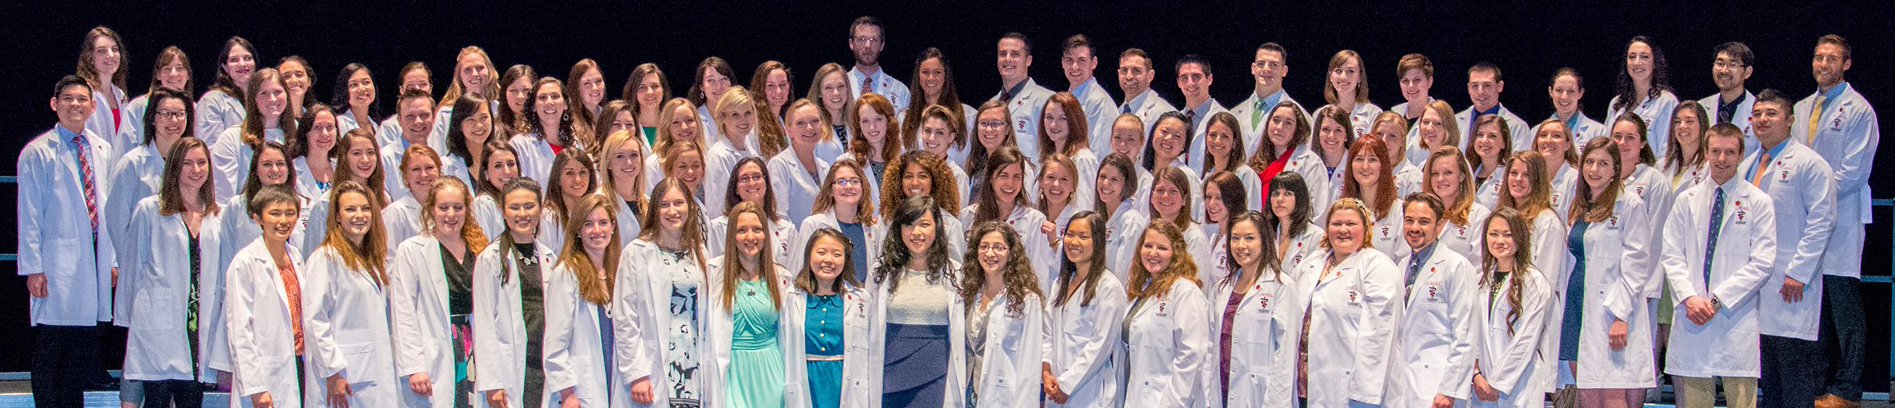 Image of DVM Graduating class in white coats